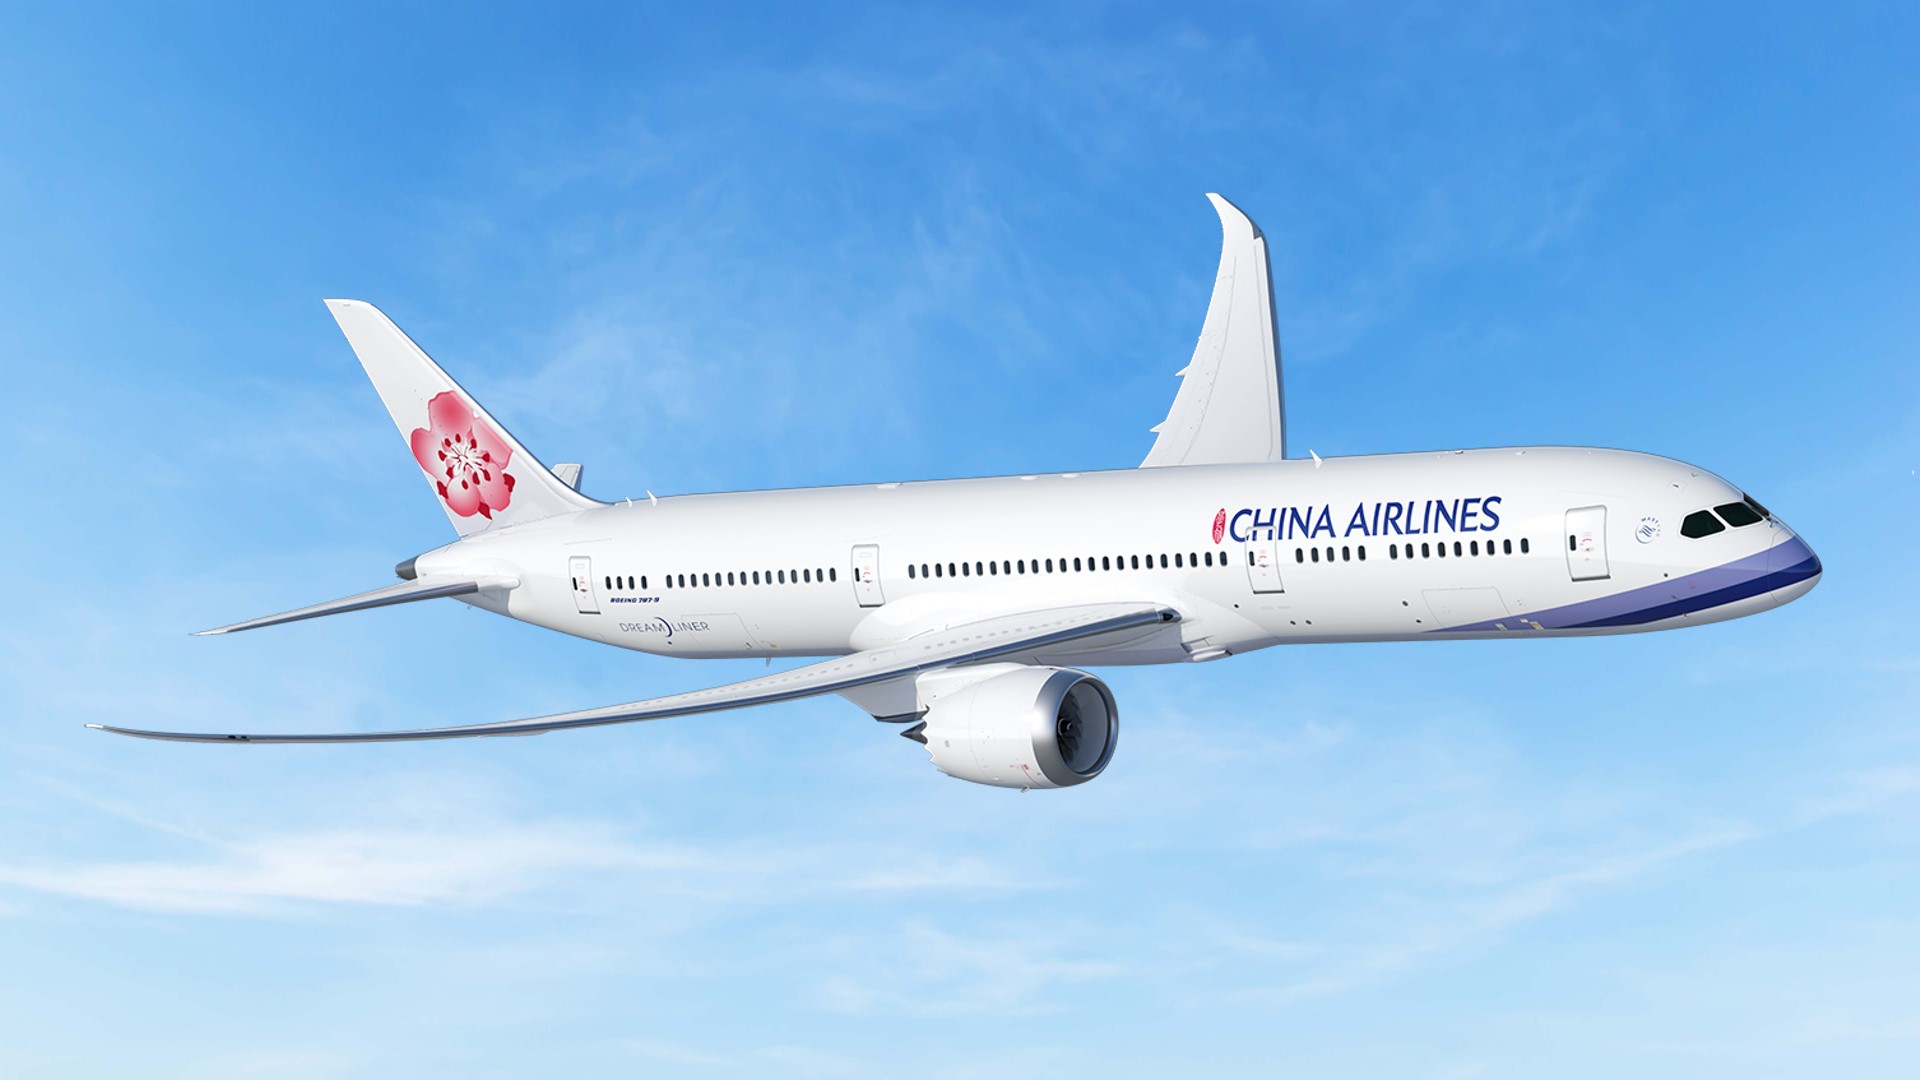  Republic of  China (Taiwan)  Continues  with  Boeing  ,  Order of  24  B787  Dreamliners  from  China  Airlines  keeps  the  market  Alive  around  Main  Land China  !